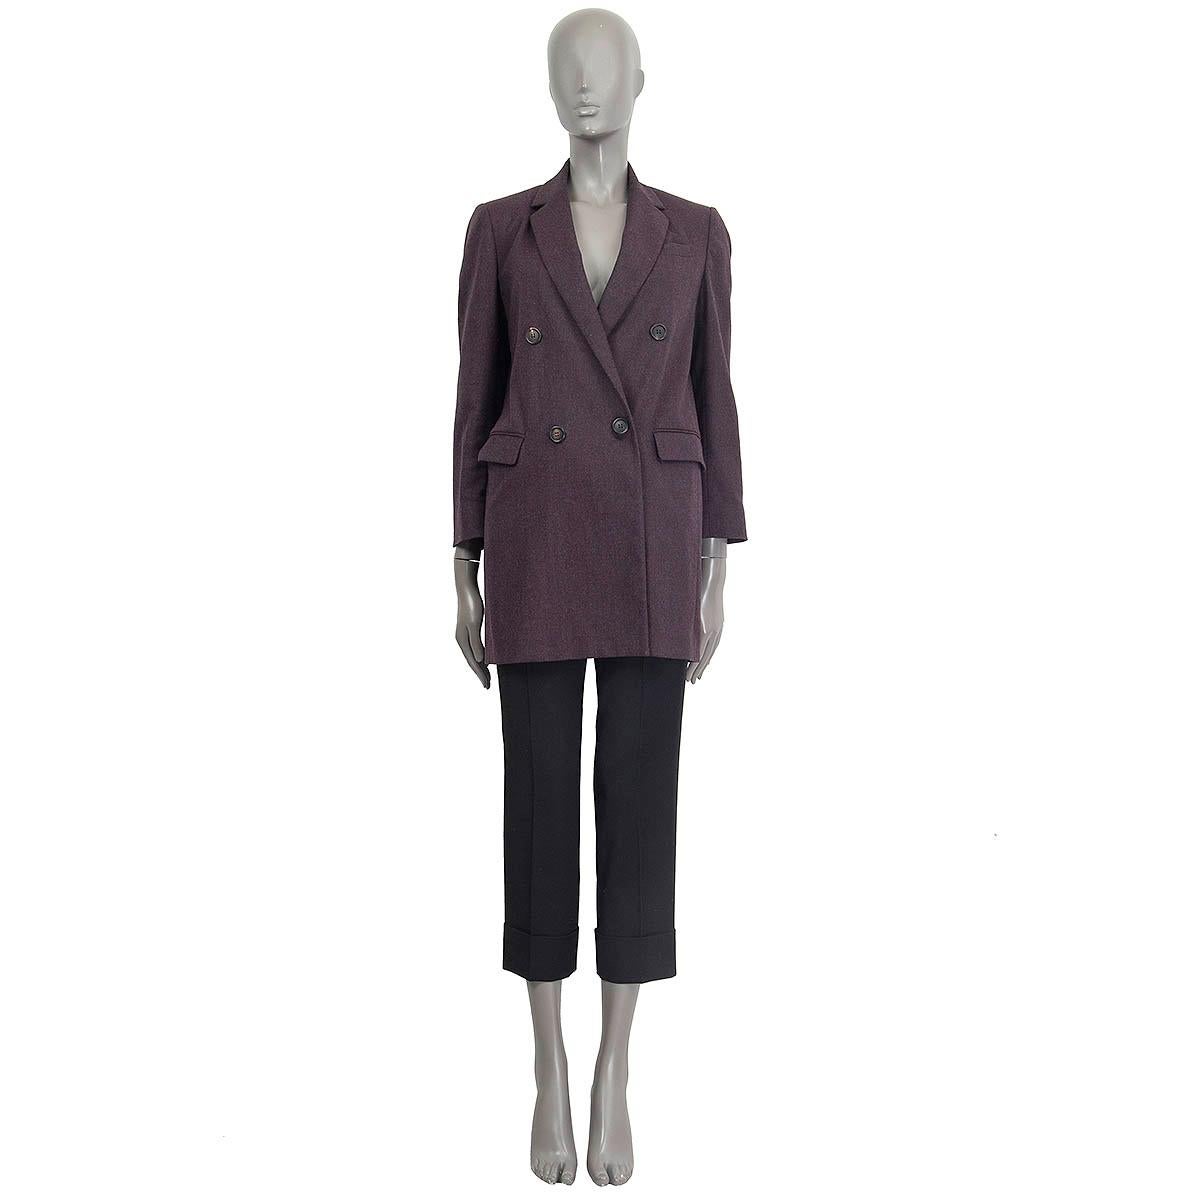 100% authentic Brunello Cucinelli double breasted blazer in eggplant cotton (49%), wool (48%), nylon (2%) and elastane (1%). Features padded shoulders and two flap pockets. Opens with two buttons on the front. Lined in black acetate (74%) and silk